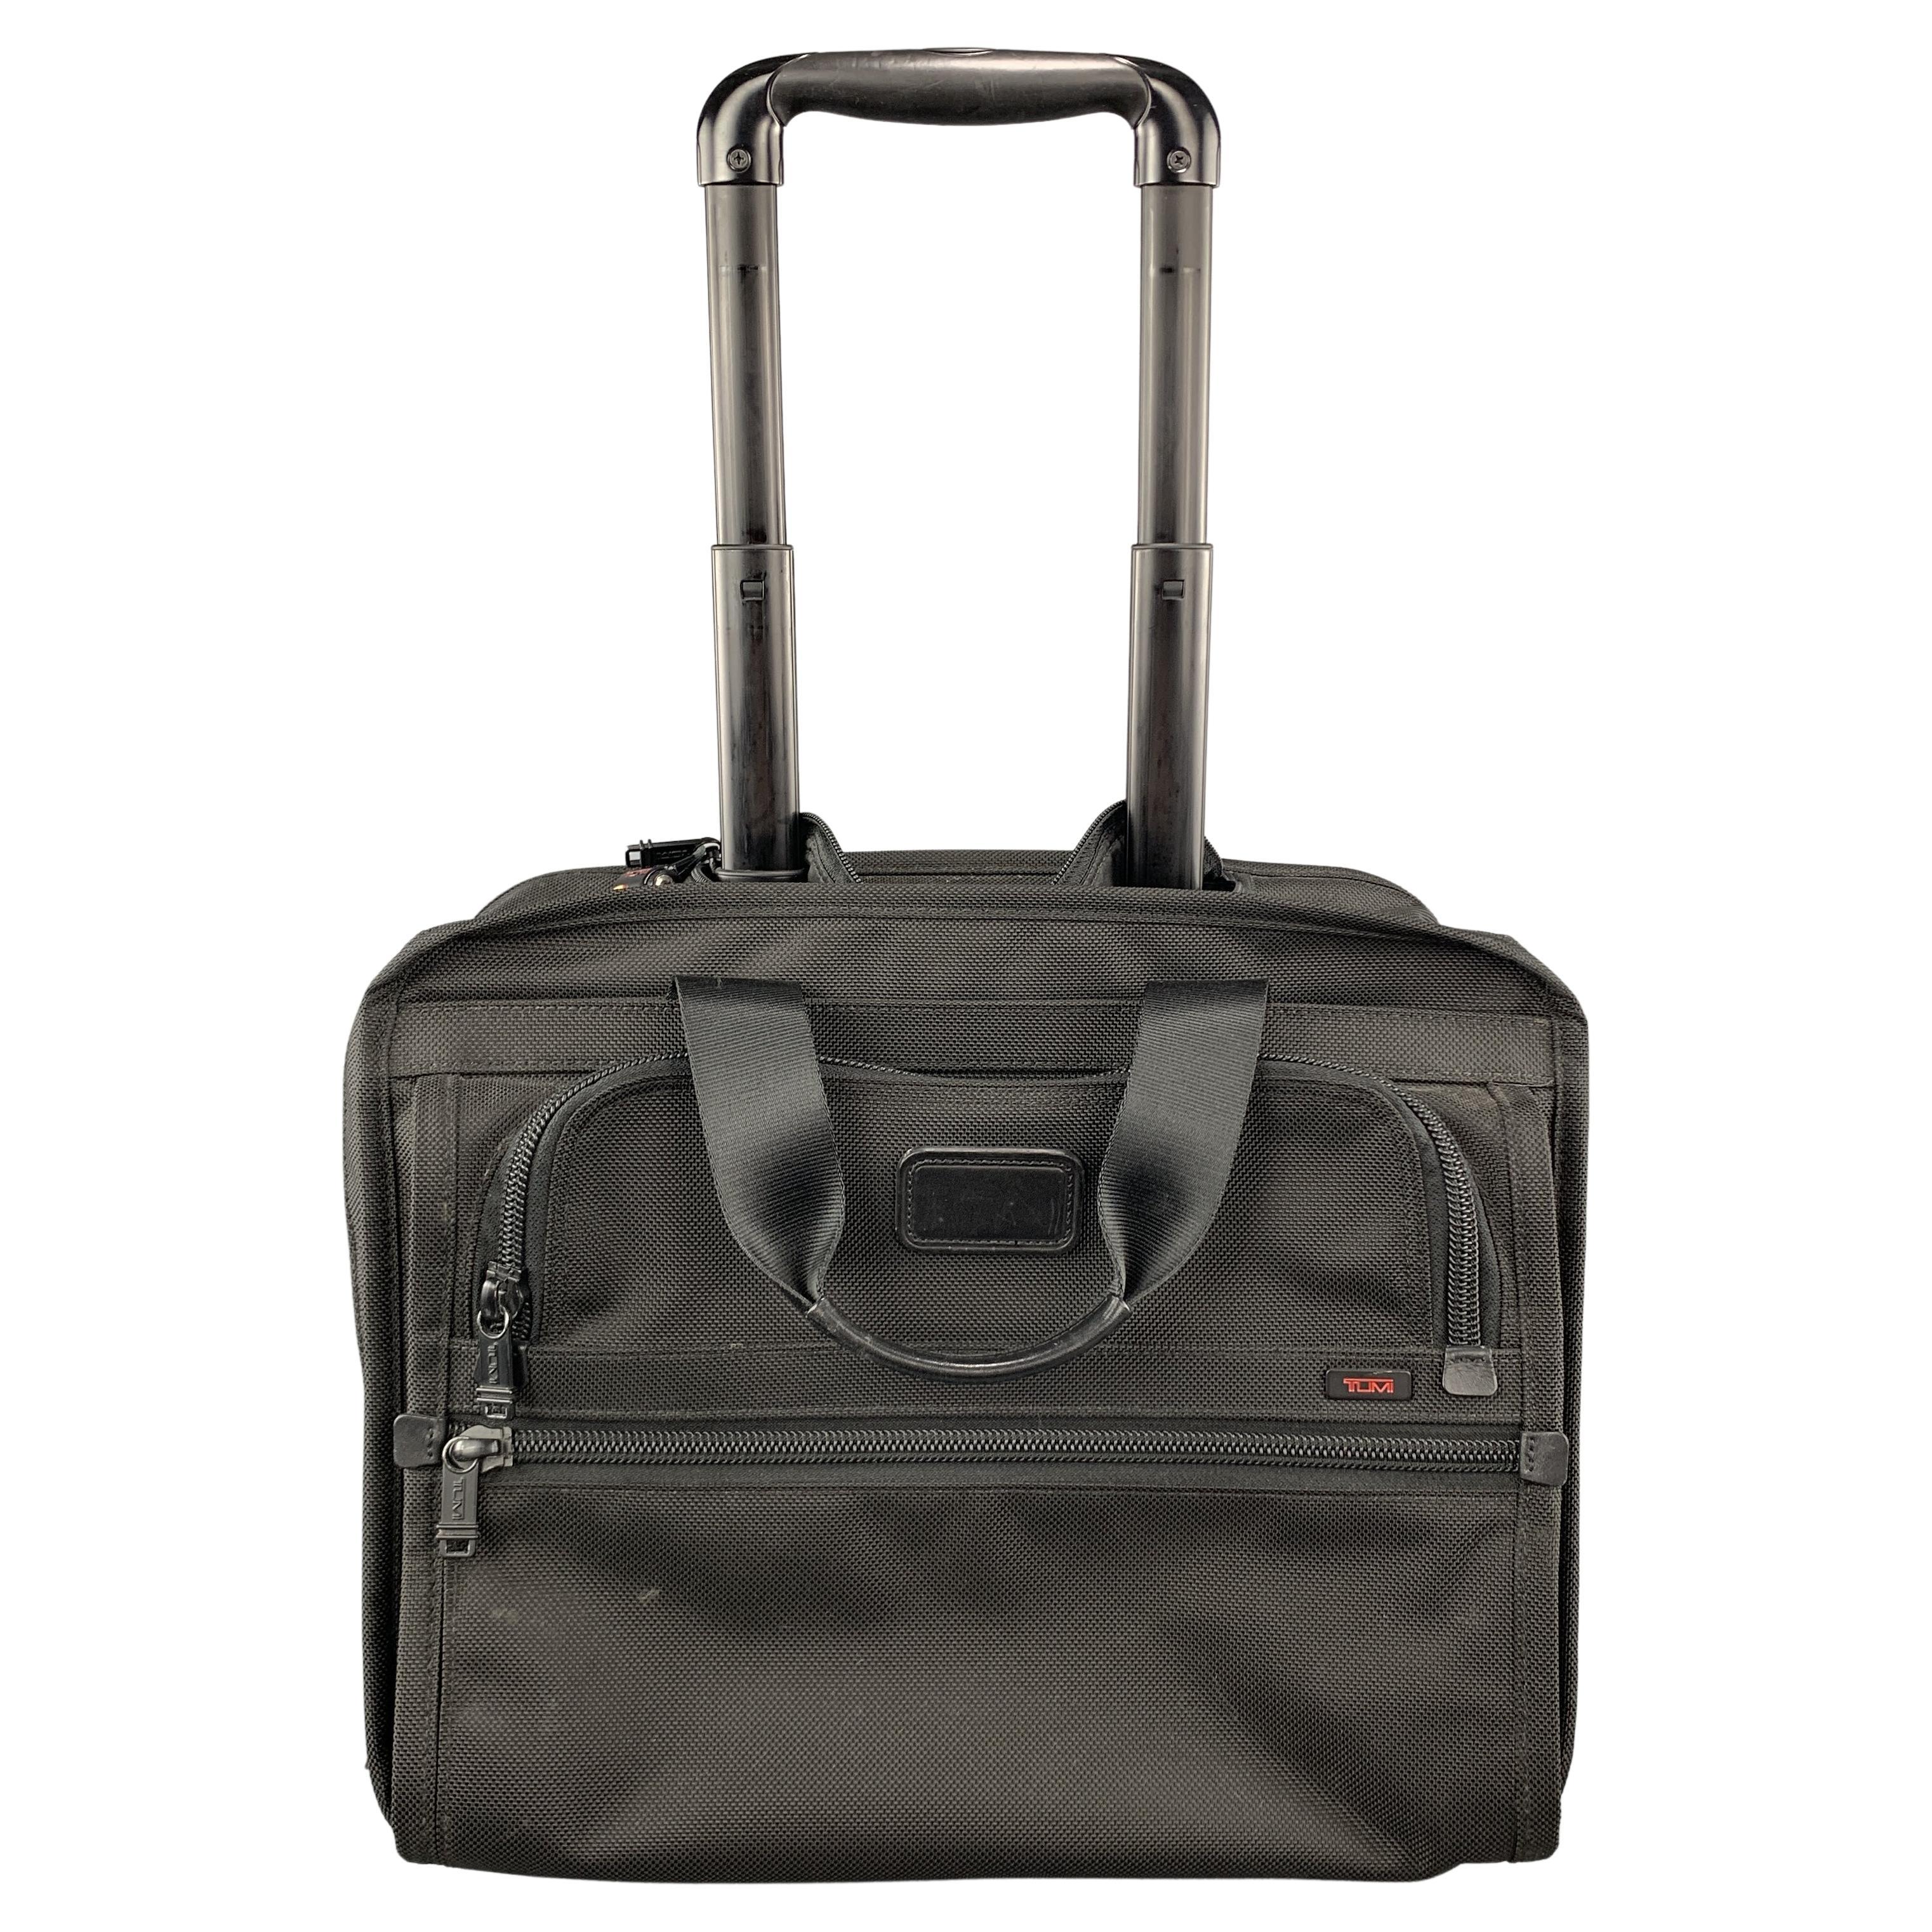 Get 20% Off Tumi Bags in Getaway Event and up to 60% Off Other Brands in  Flash Sale